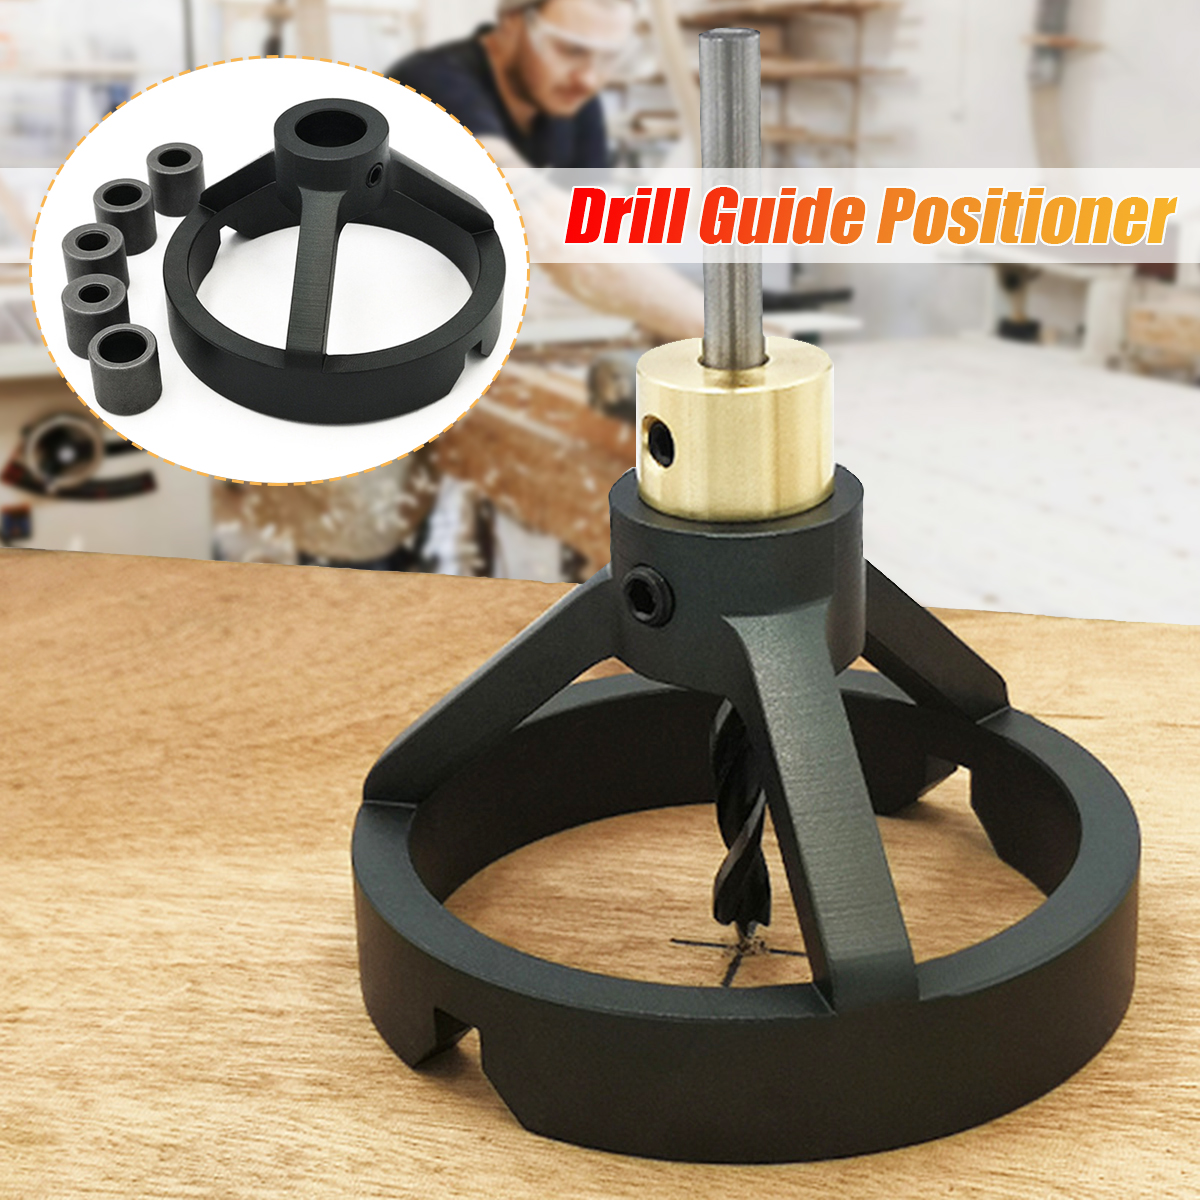 Vertical-Drill-Guide-Positioner-Straight-Carpentry-Hole-Puncher-Woodworking-Tool-1670895-1